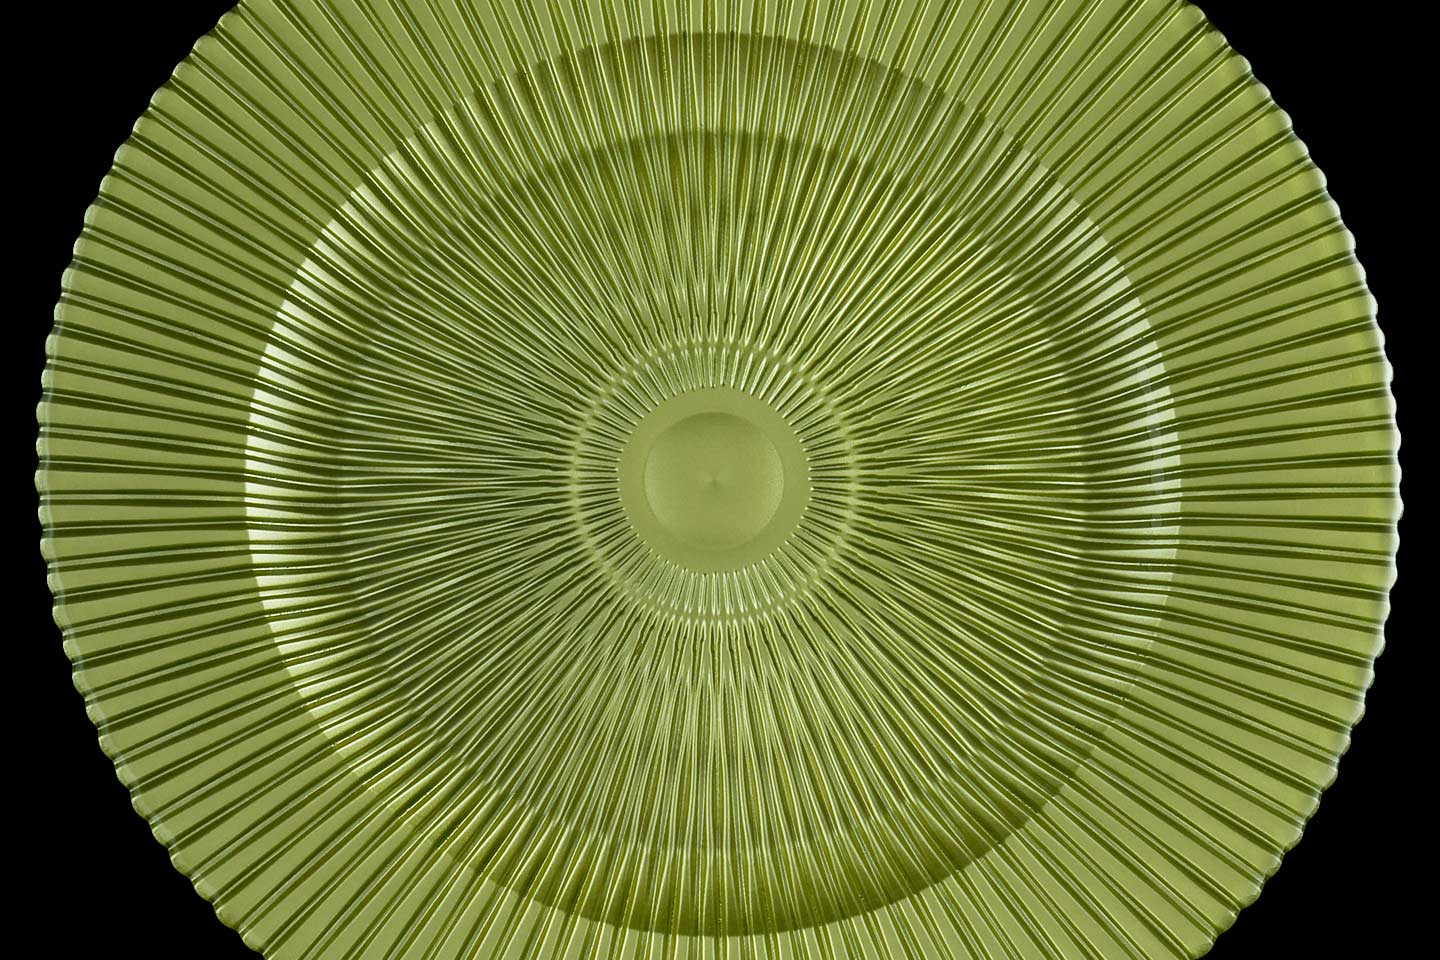 the citron green marbella charger plate from mandarin orange trading company, photographed by Jacob Rosenfeld